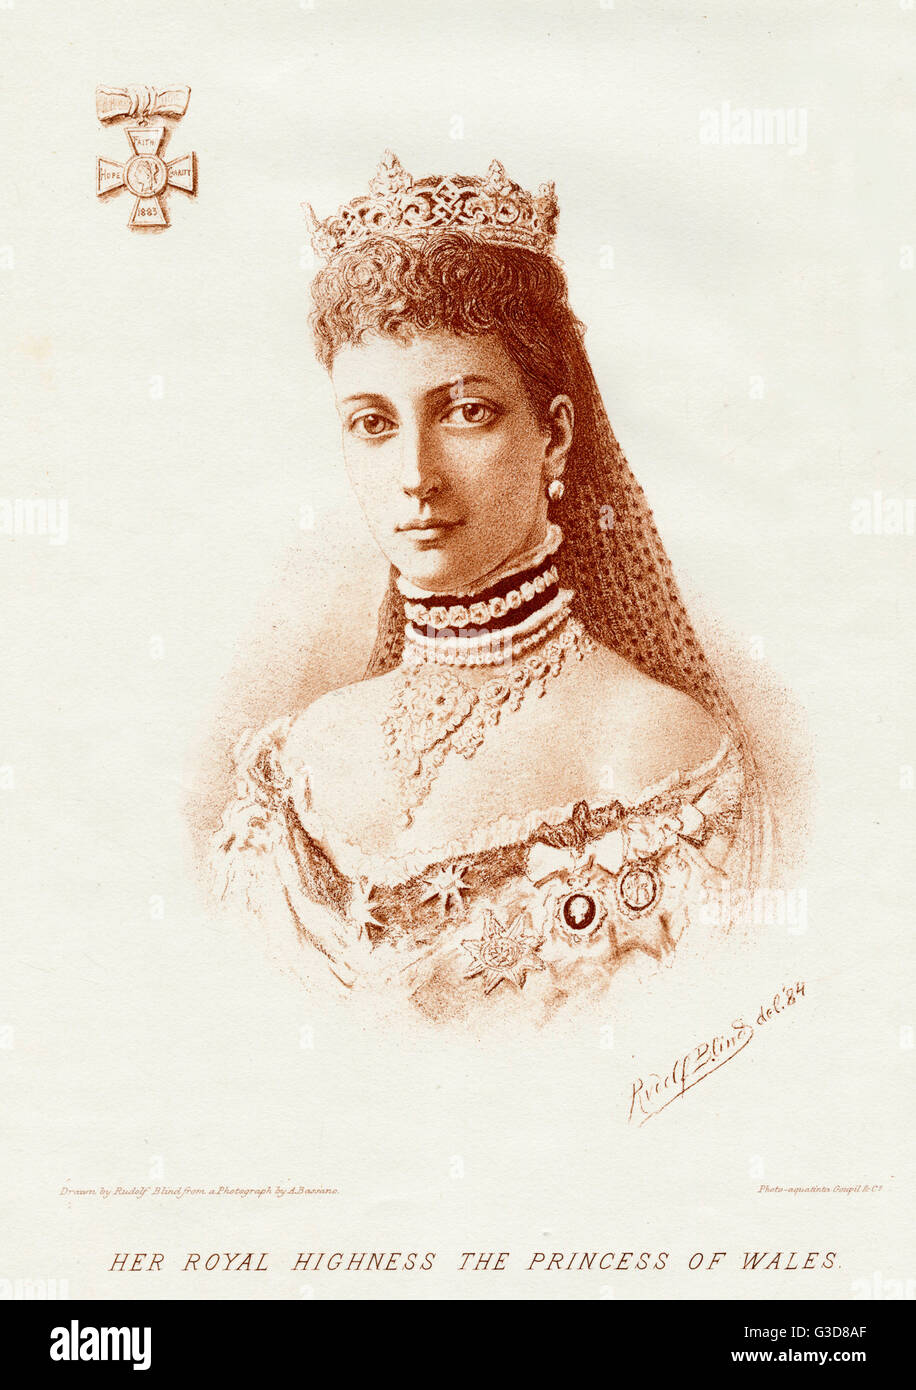 Her Royal Highness The Princess of Wales 1883 Stock Photo